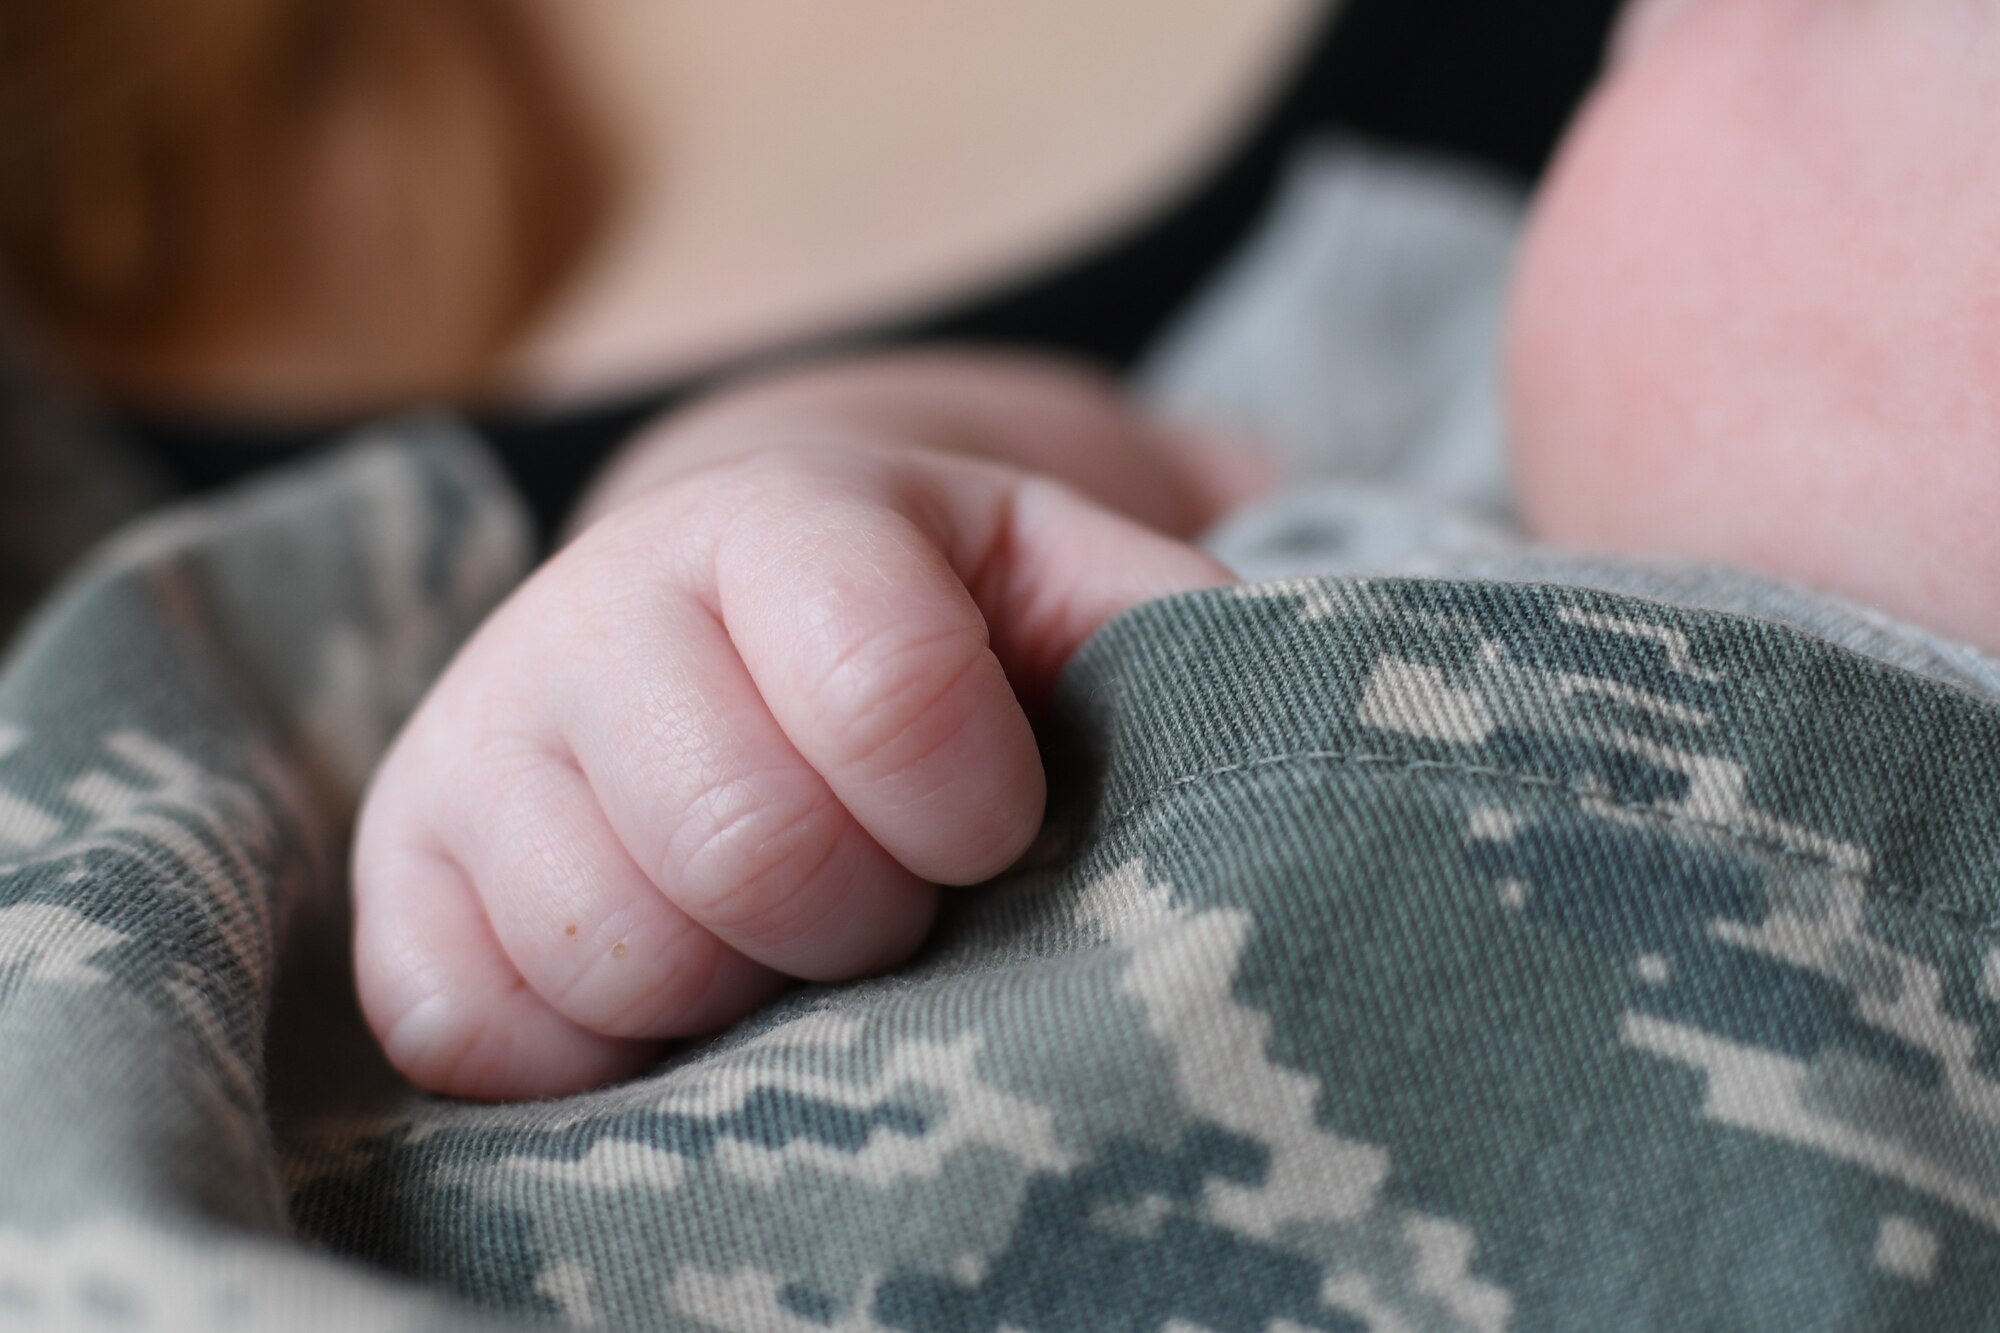 photo shows a baby hand gripping the should of of military uniform.